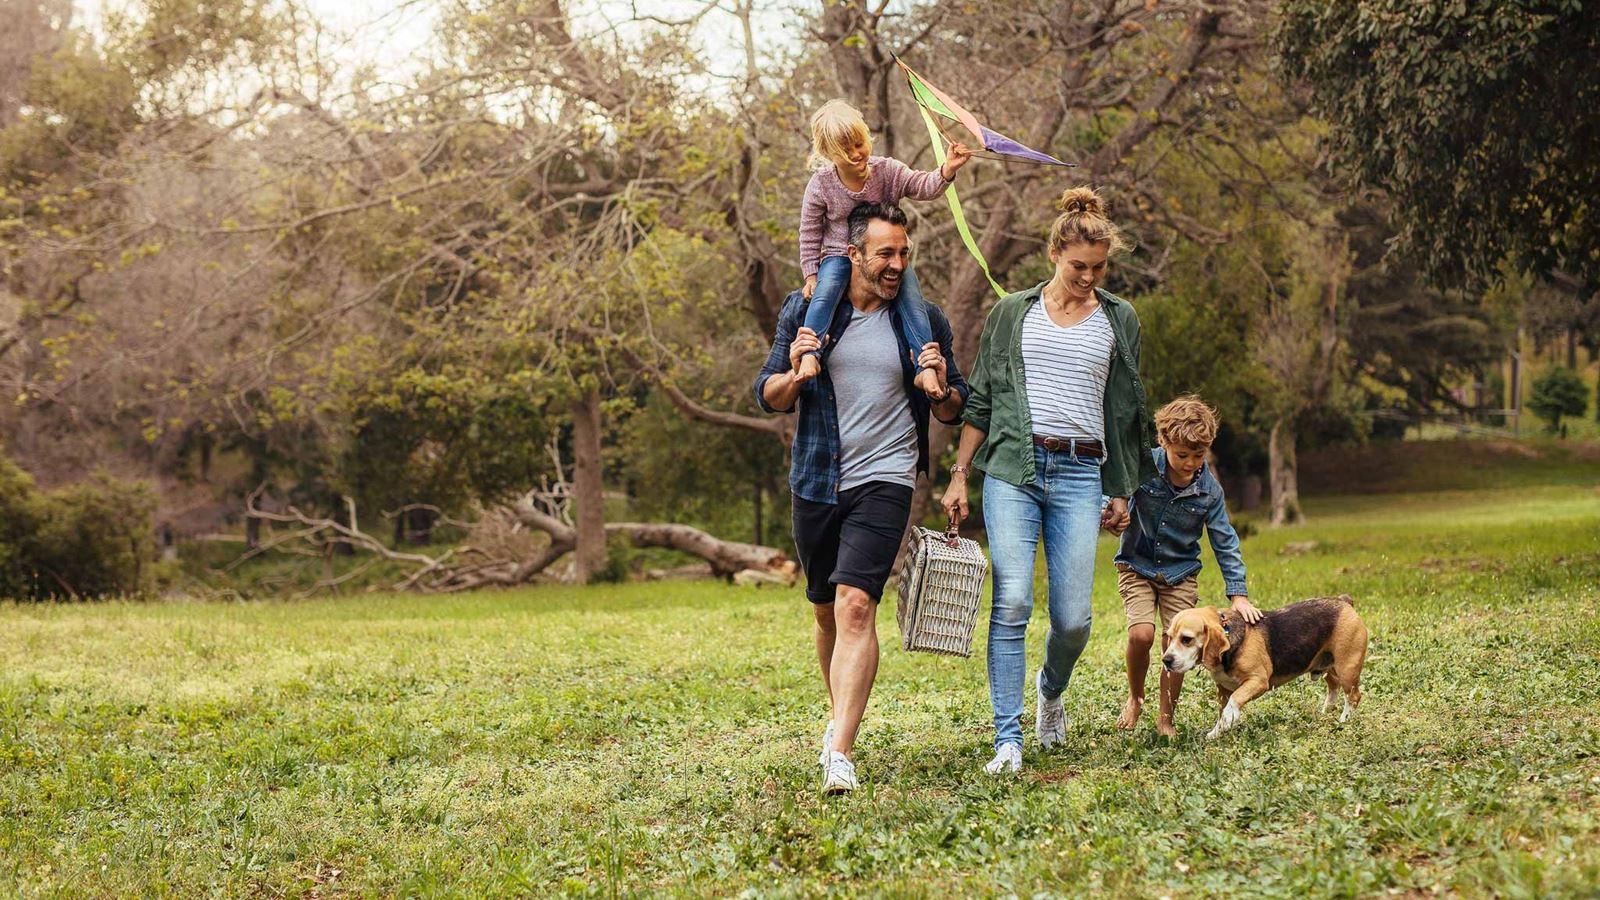 Family with dog walking in park 16:9